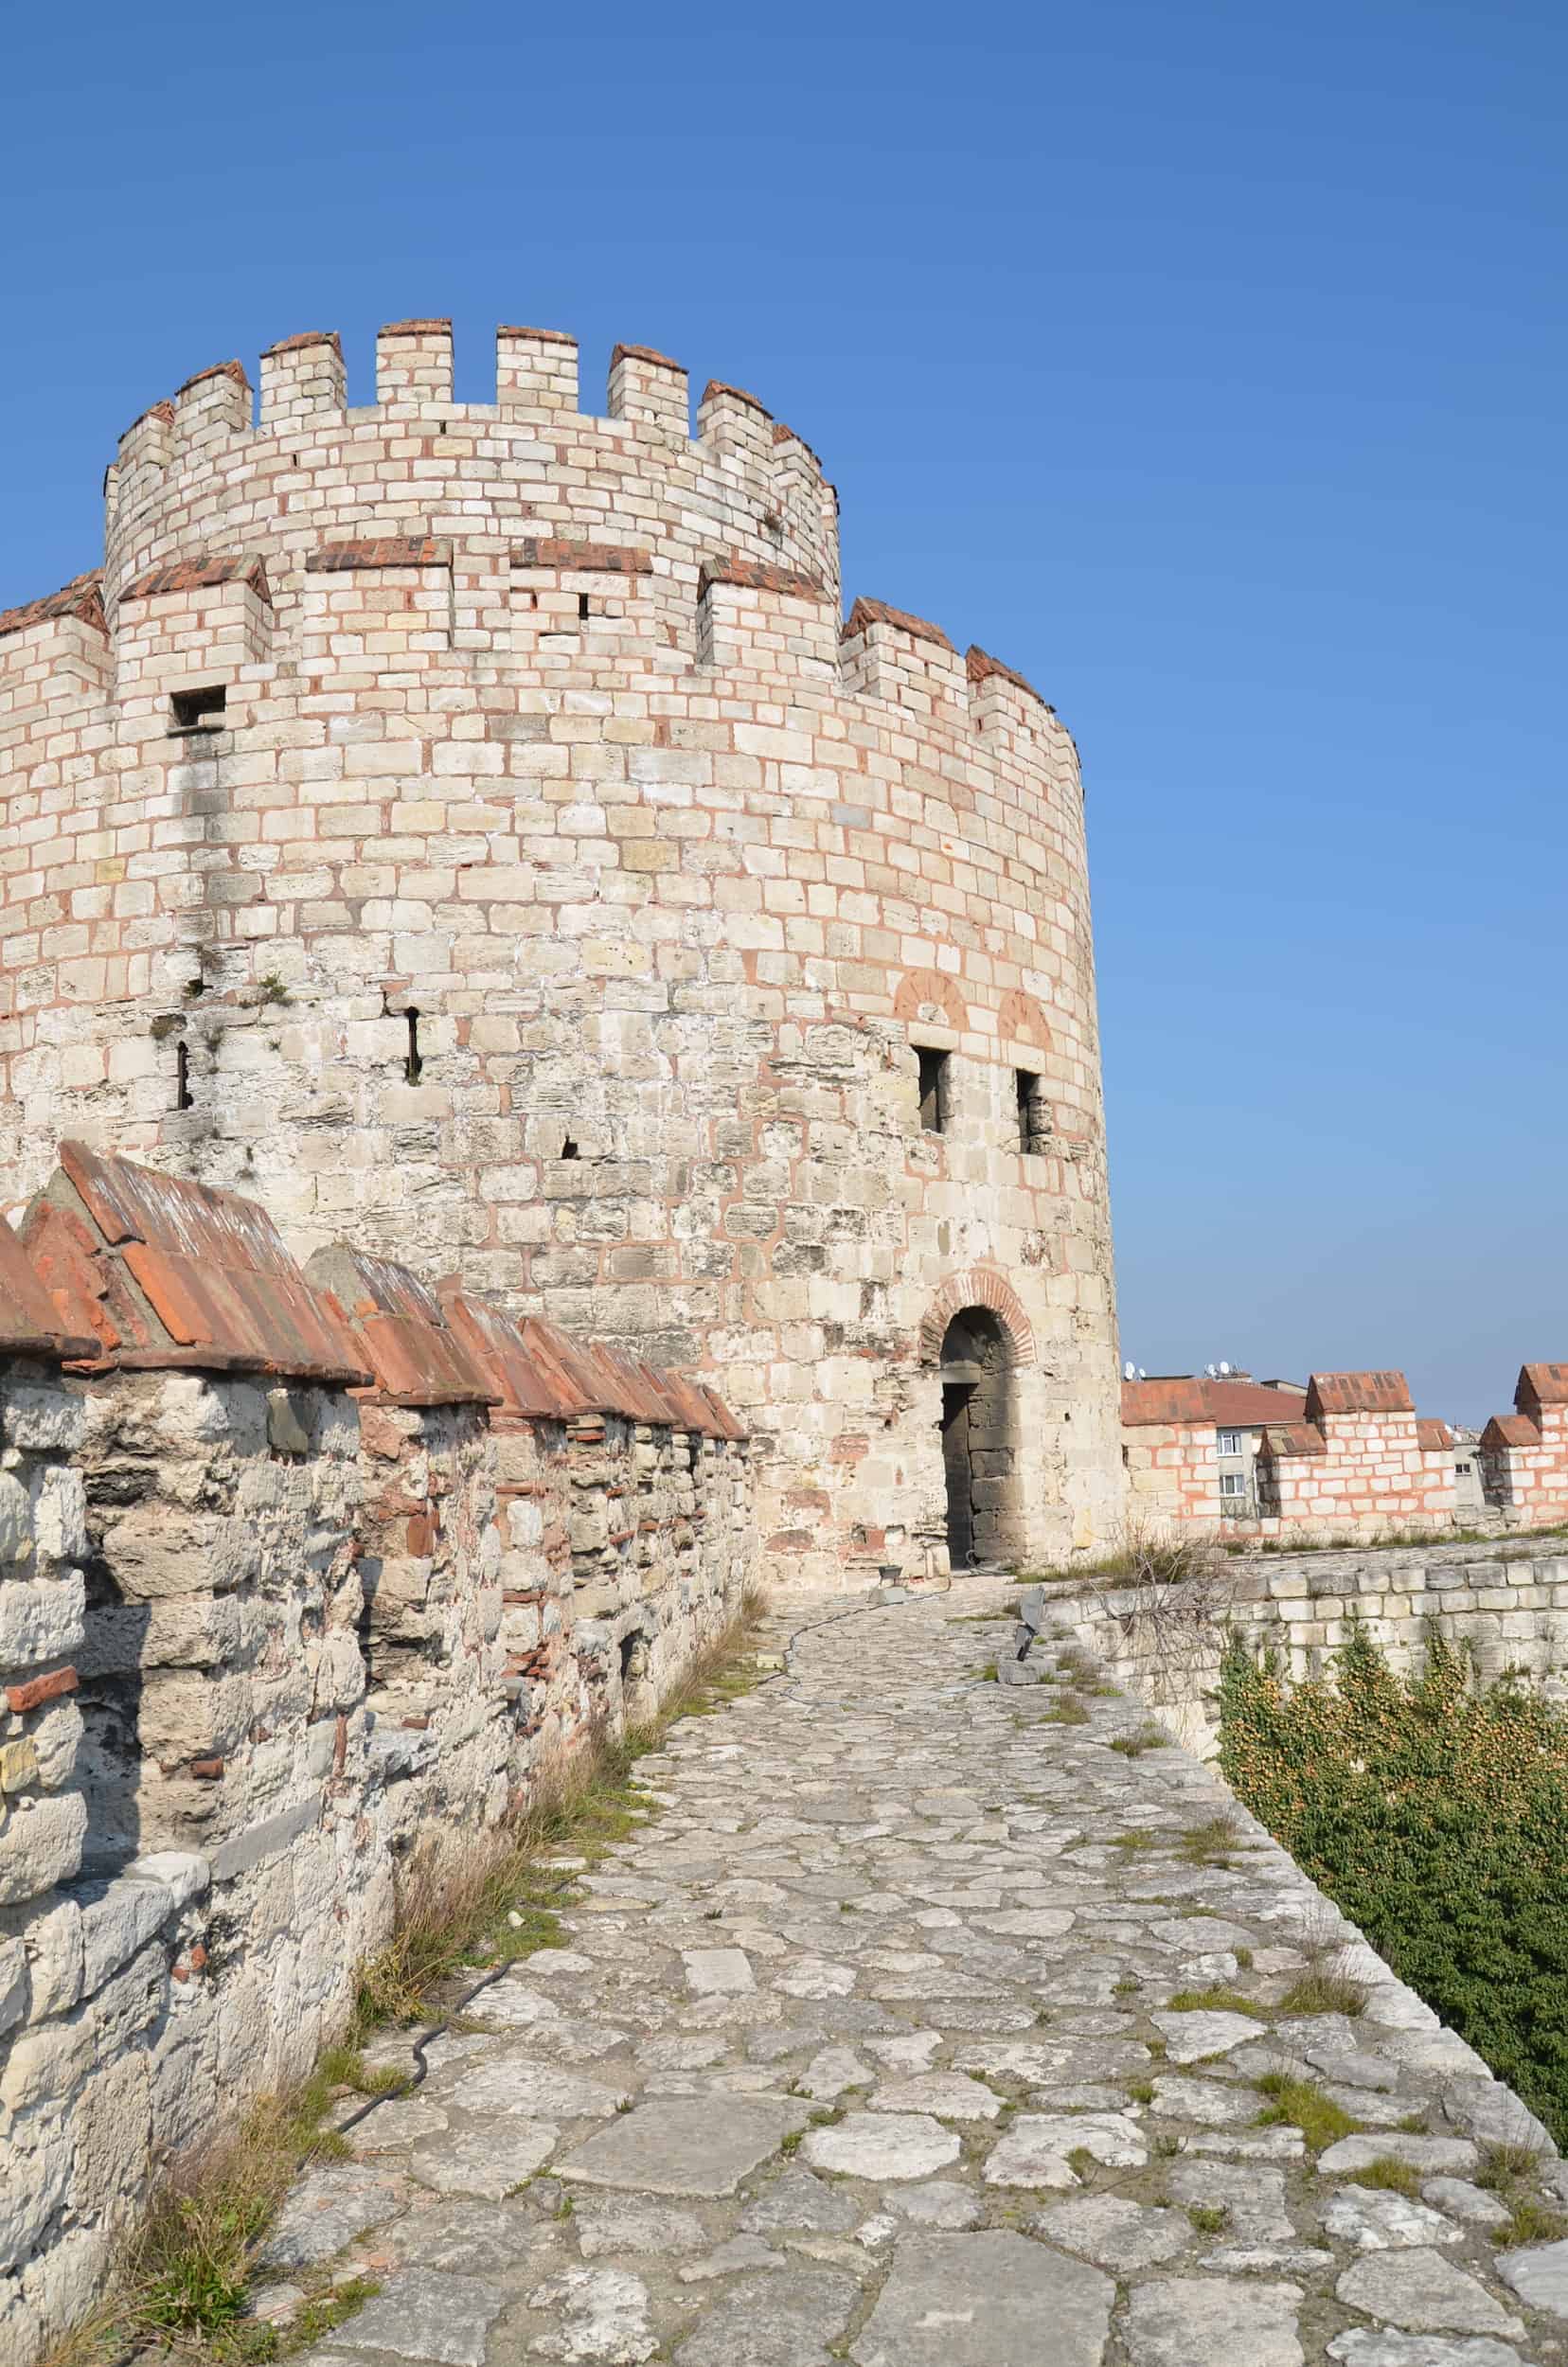 Treasury Tower at Yedikule Fortress in Istanbul, Turkey